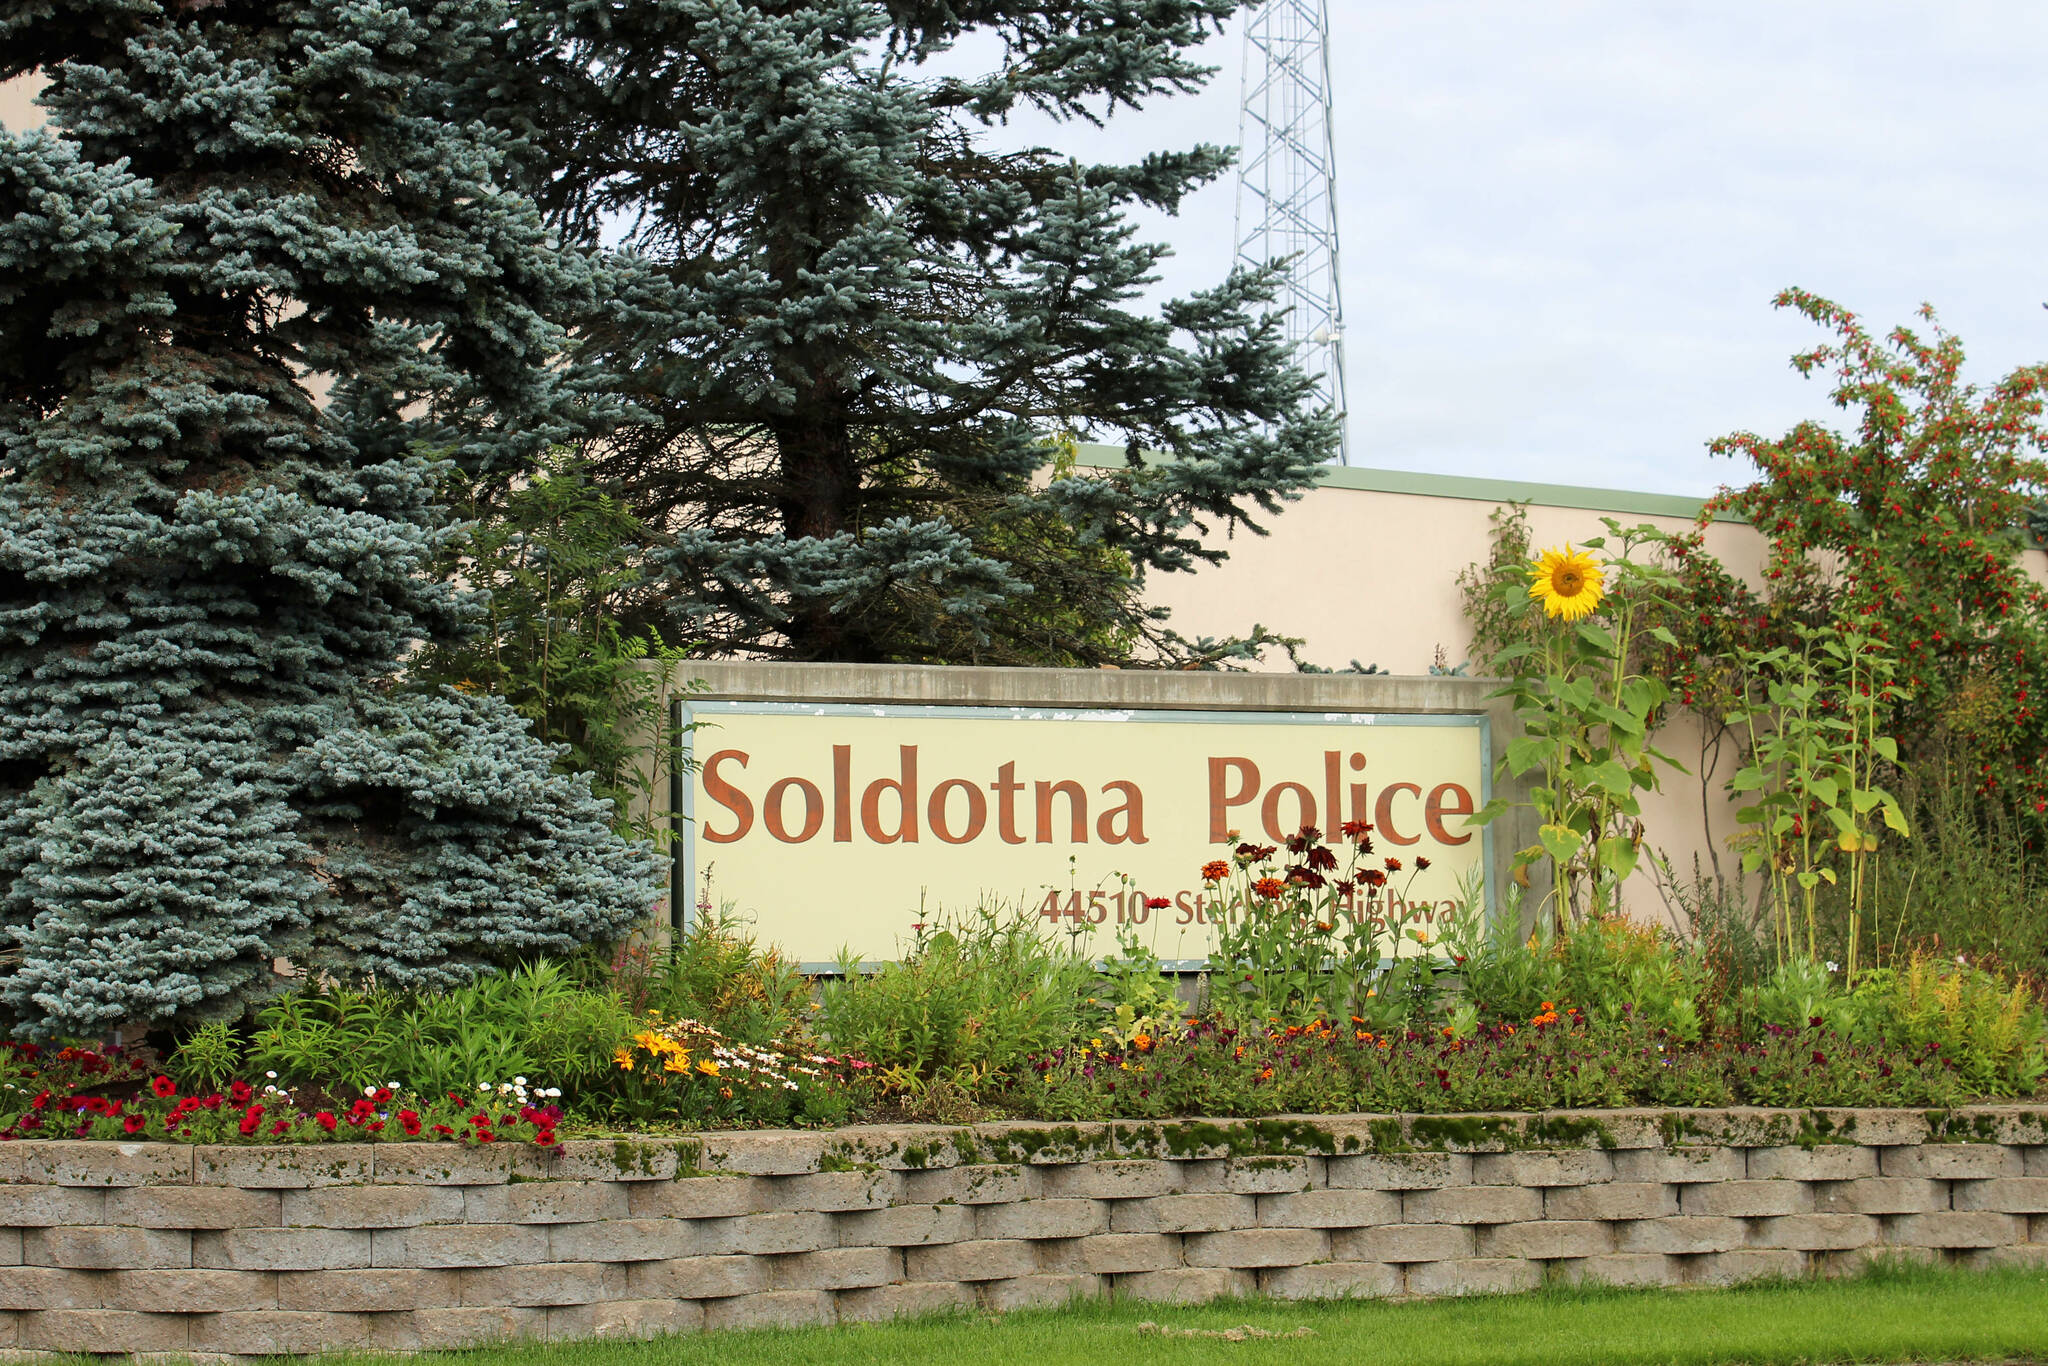 Foliage surrounds the Soldotna Police Department sign on Tuesday, Aug. 30, 2022, in Soldotna, Alaska. The building will be the Central Peninsula site for National Prescription Drug Take Back Day on Saturday. (Ashlyn O’Hara/Peninsula Clarion)